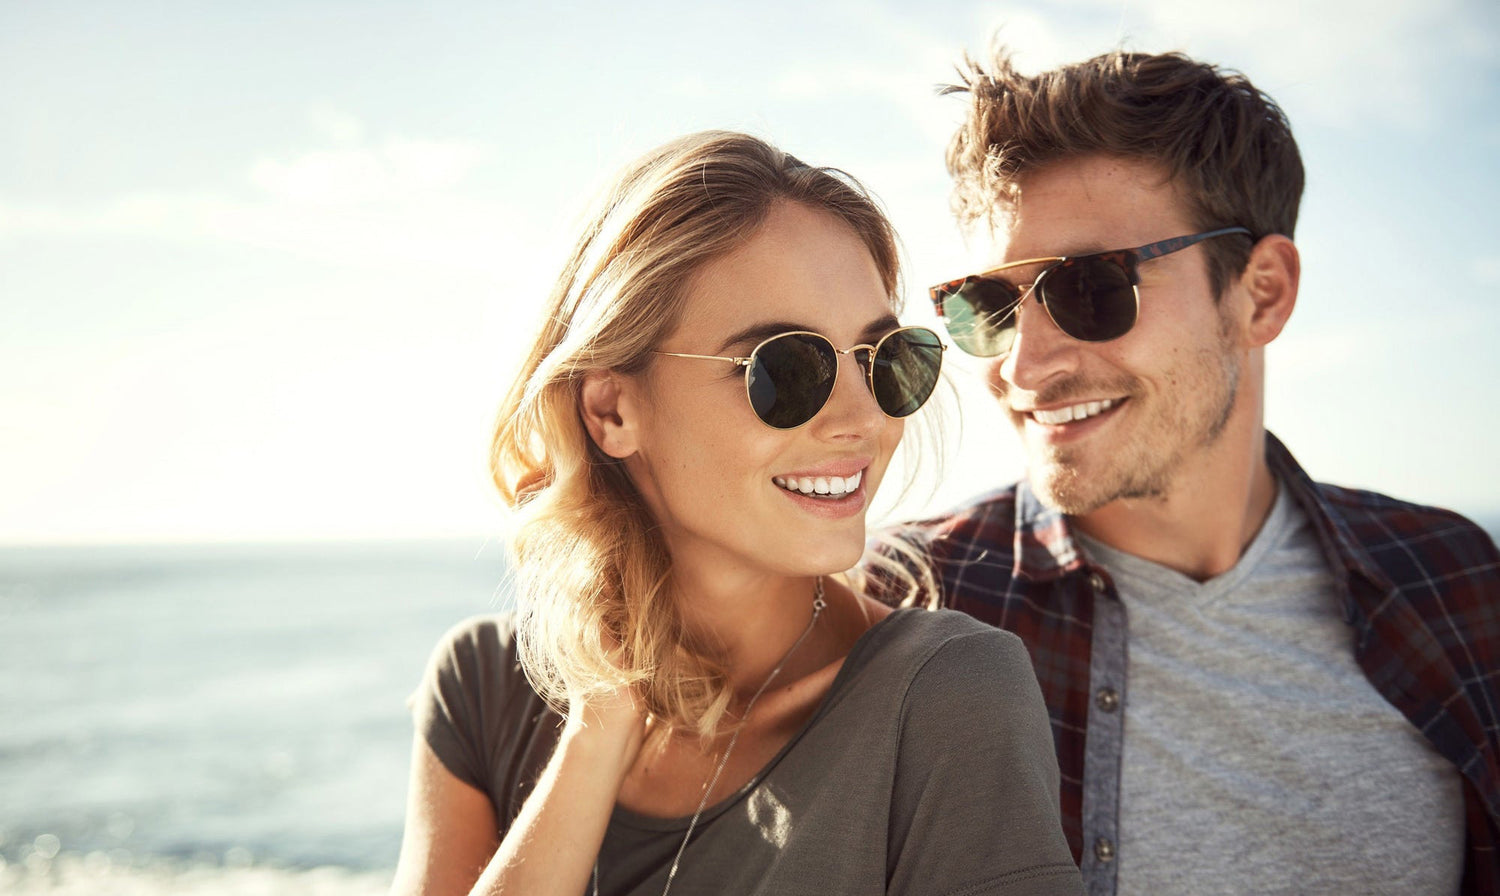 A man and a woman both putting on a pair of Sunglasses